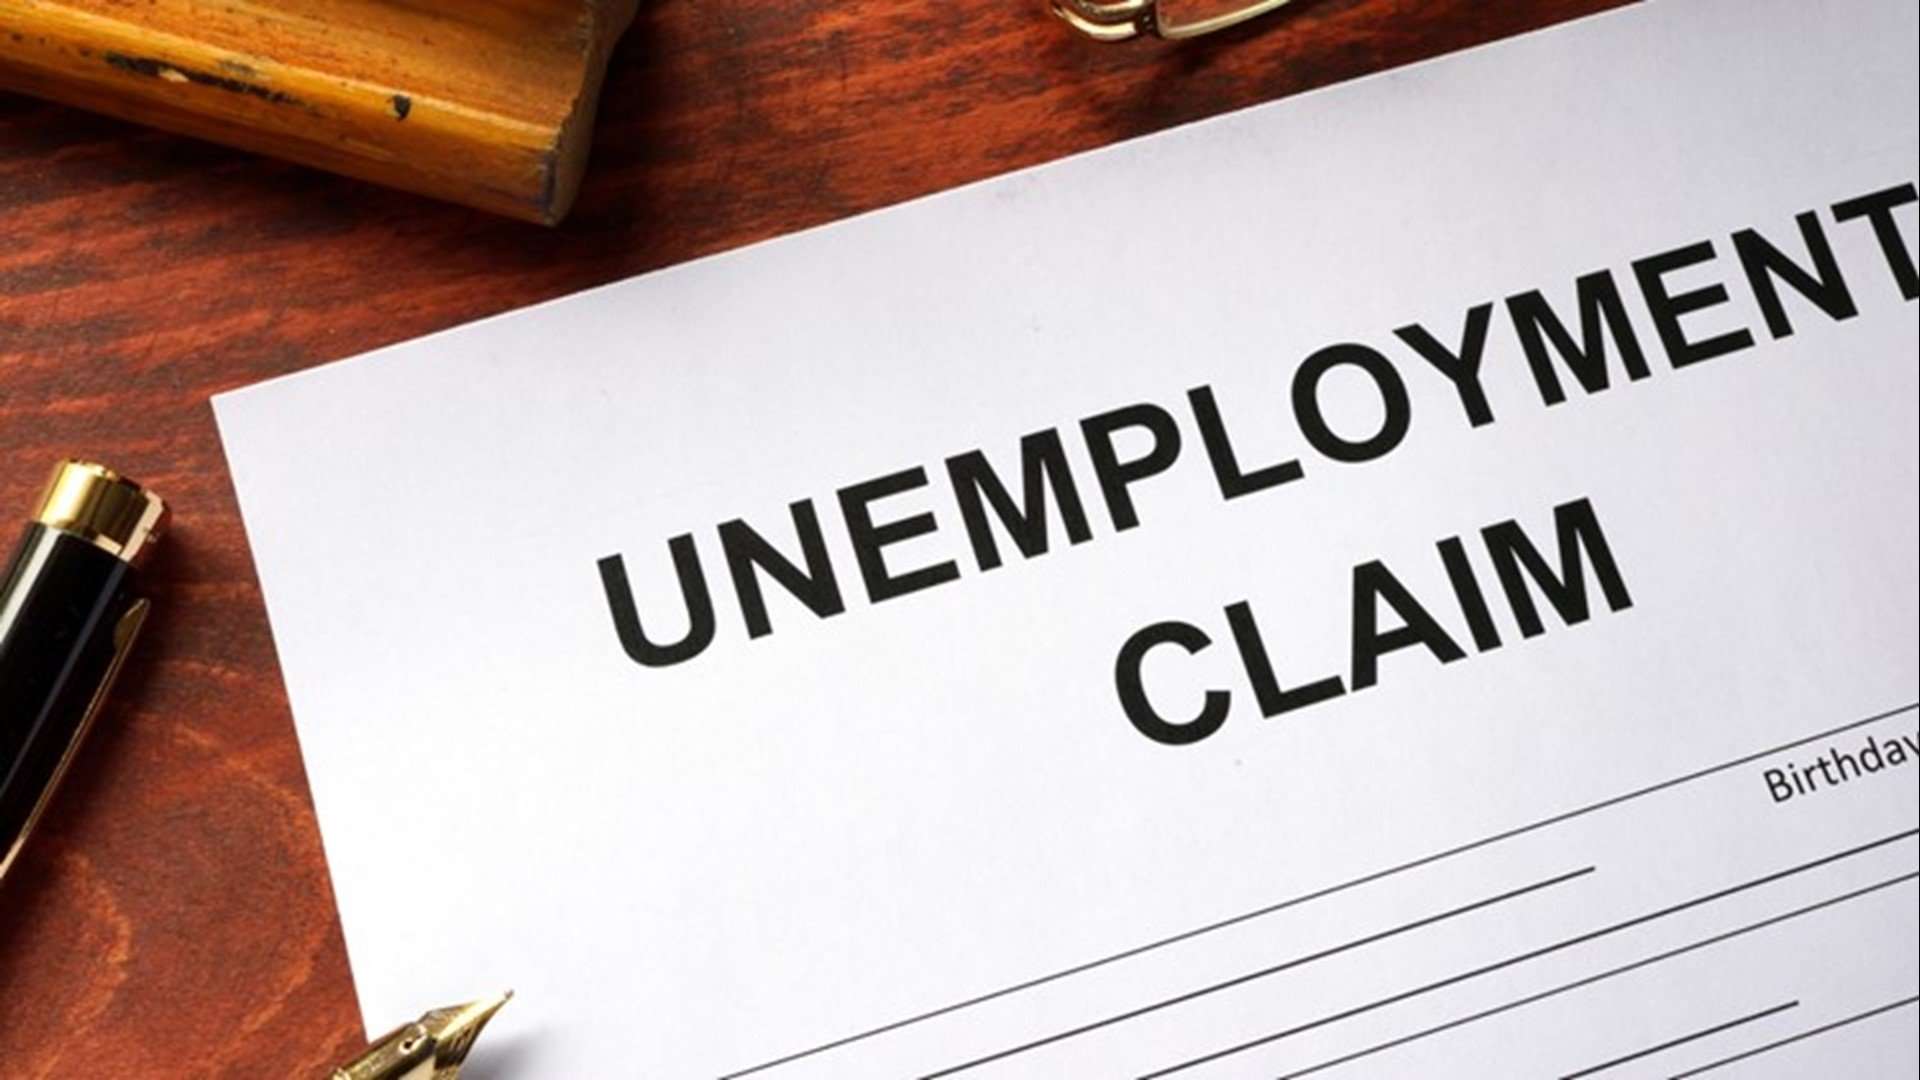 South Carolina latest unemployment numbers filing